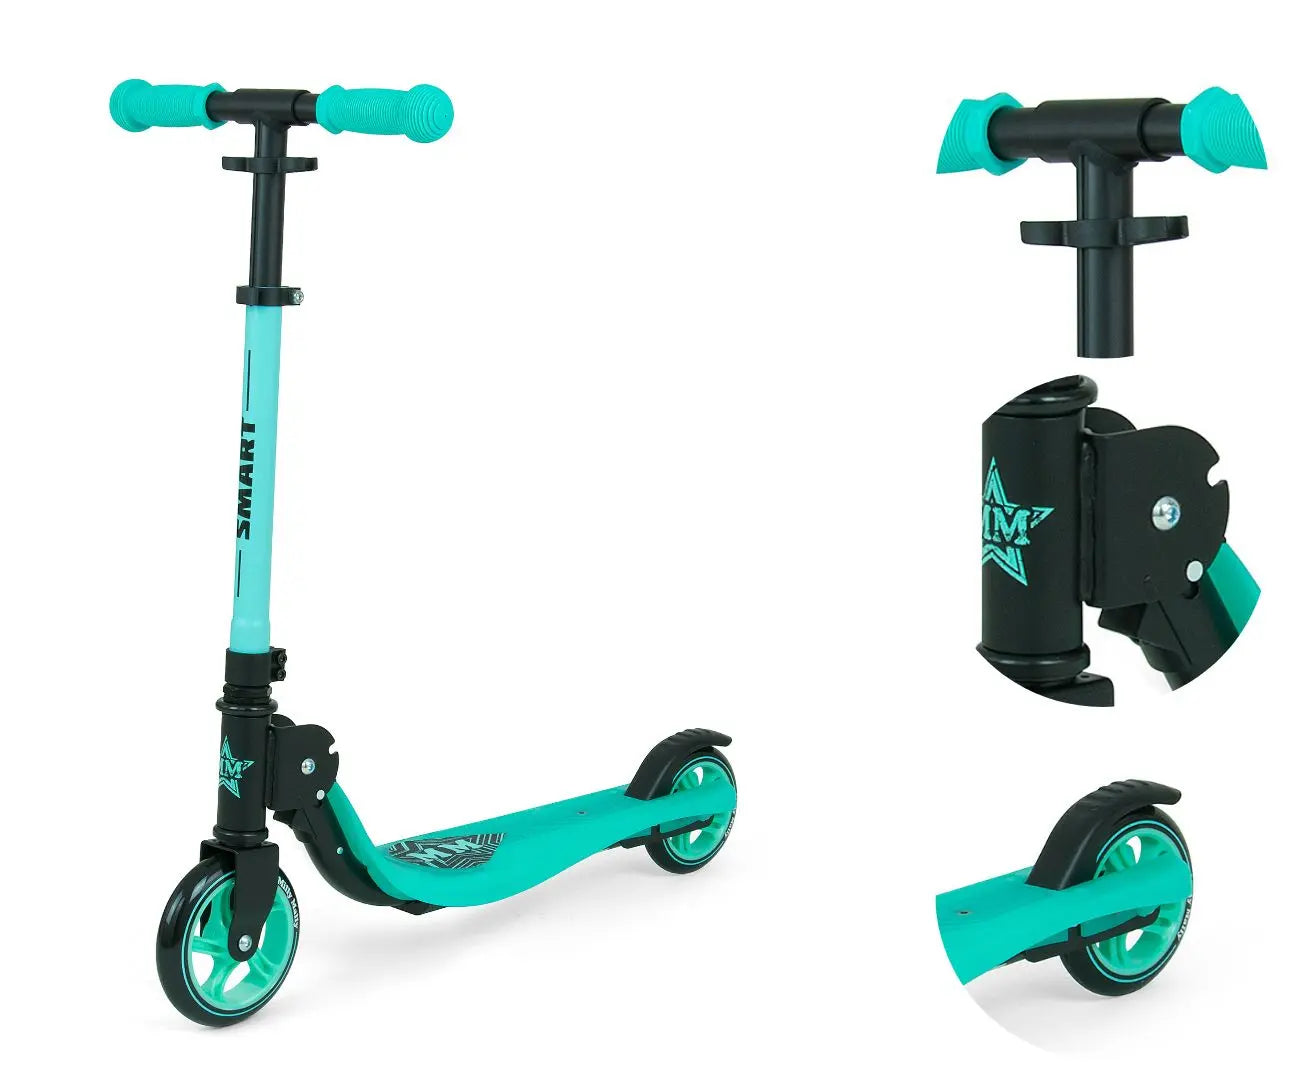 A blue scooter with black wheels, featuring an innovative quick-folding system, adjustable handlebar height, ABEC-5 bearings, PU wheels, and a maximum weight capacity of 50 kg. Aluminum handlebars and anti-slip standing board. Weighs 4.03 kg.